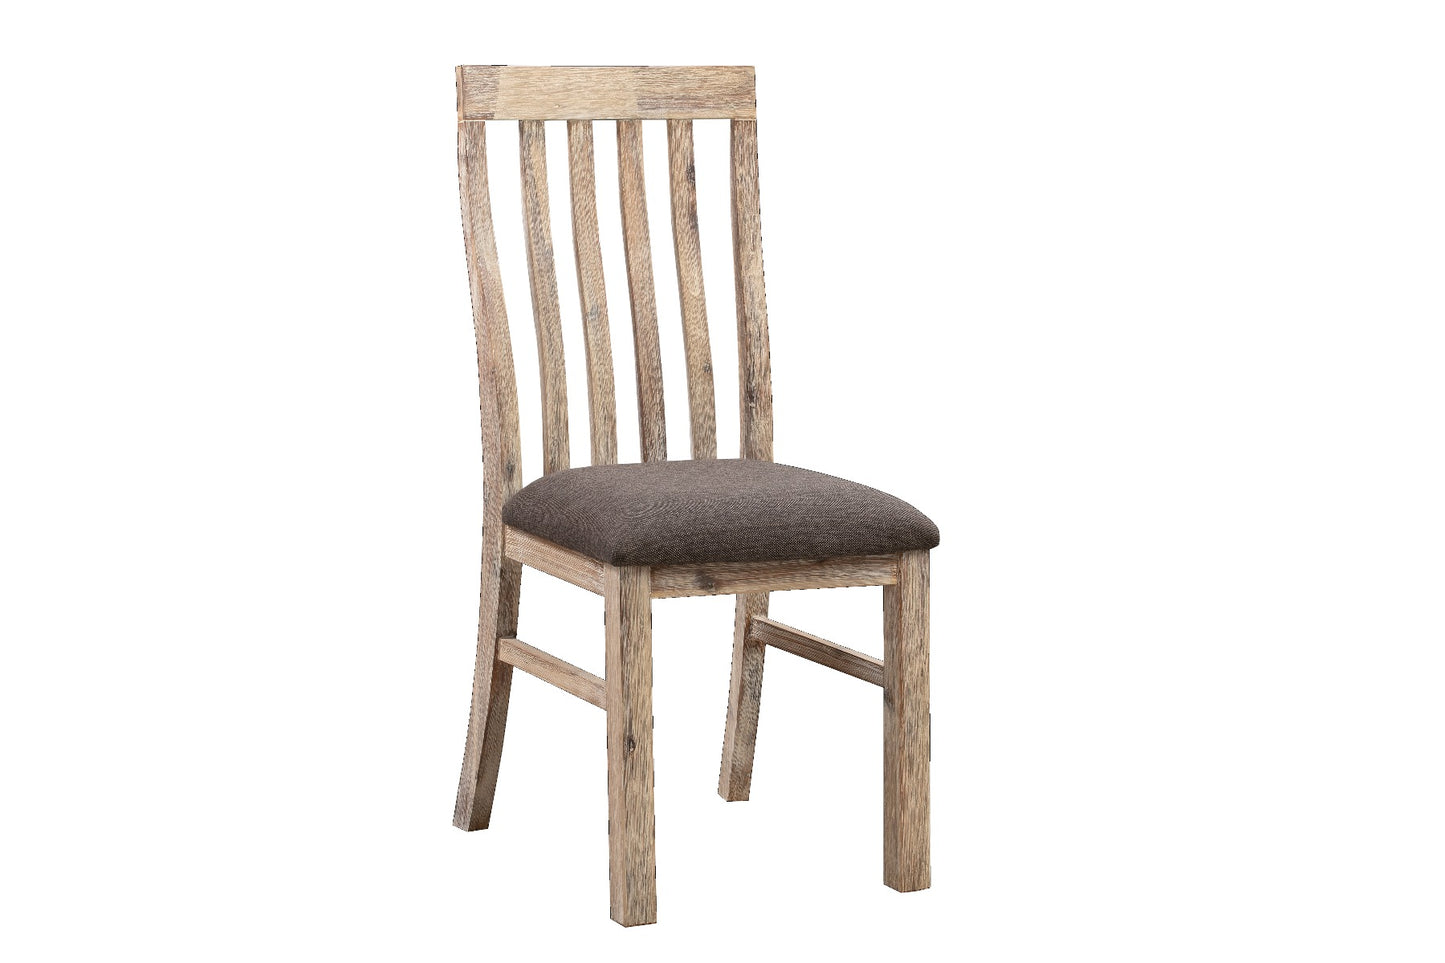 2x Wooden Frame Leatherette in Solid Acacia Wood & Veneer Dining Chairs in Oak Colour - image11